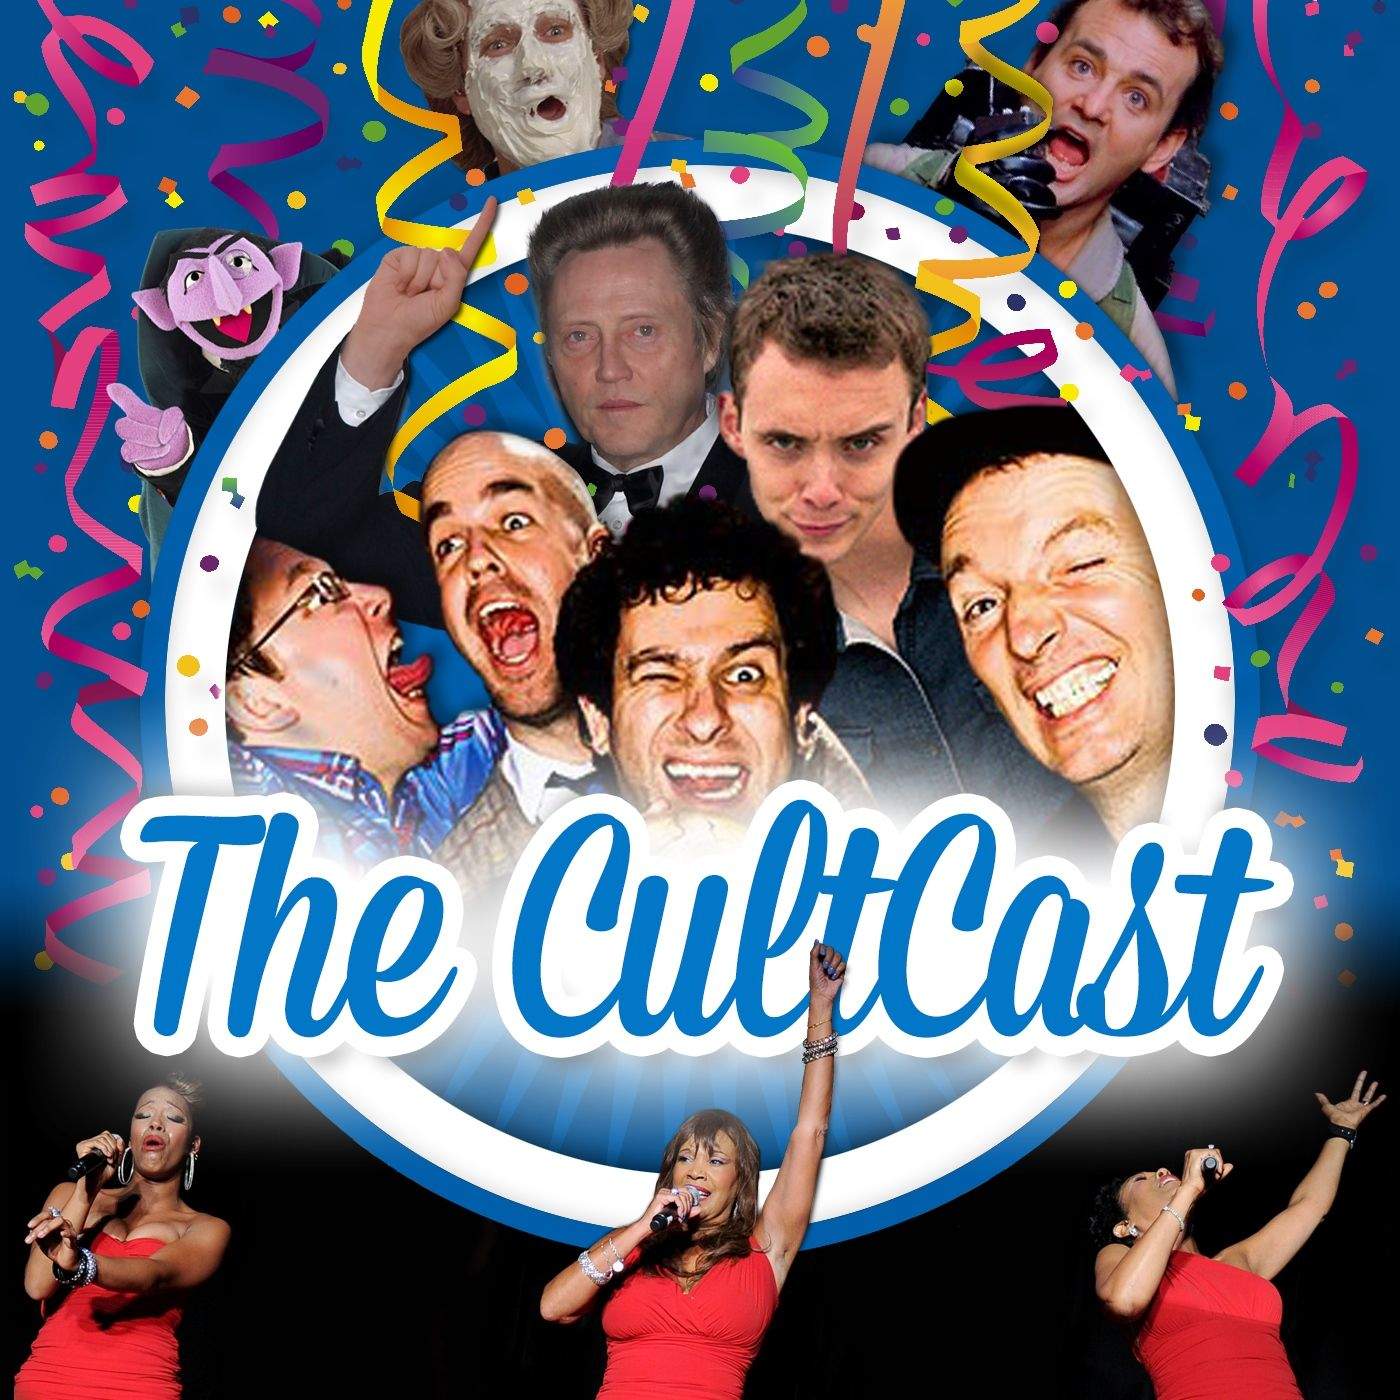 Come party with the CultCast.